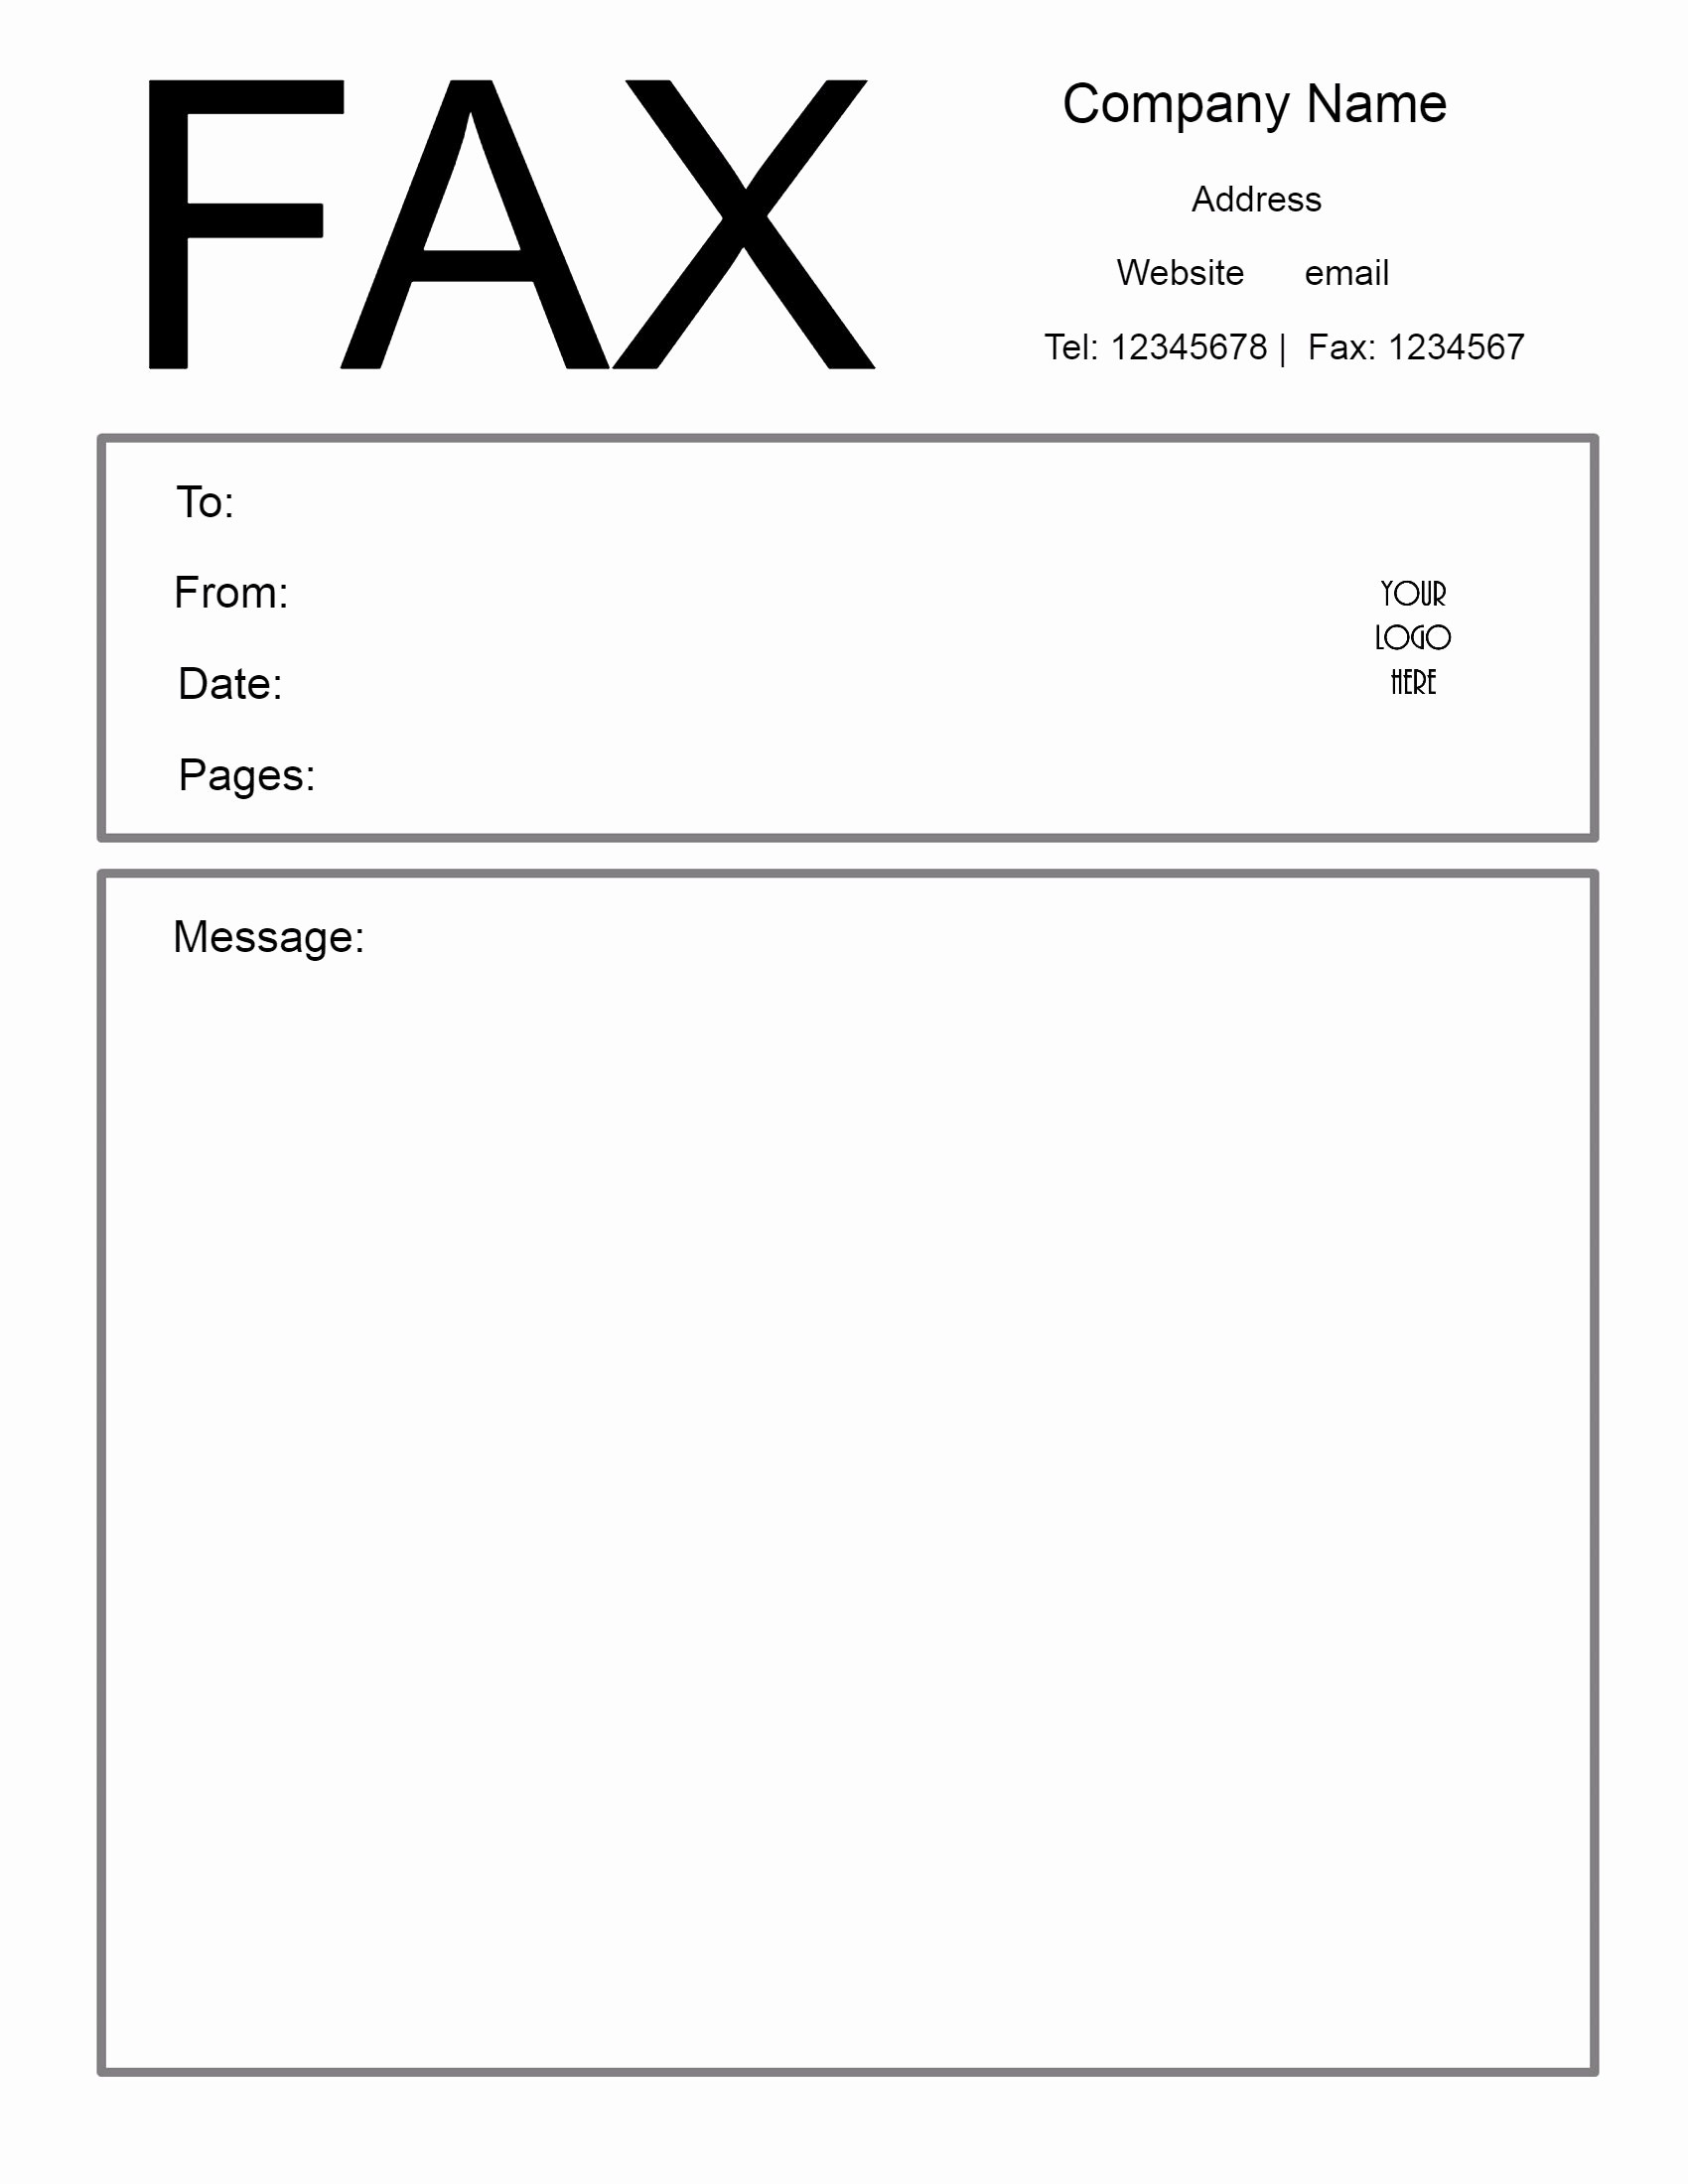 Cover Sheet for A Fax Elegant Free Fax Cover Sheet Template